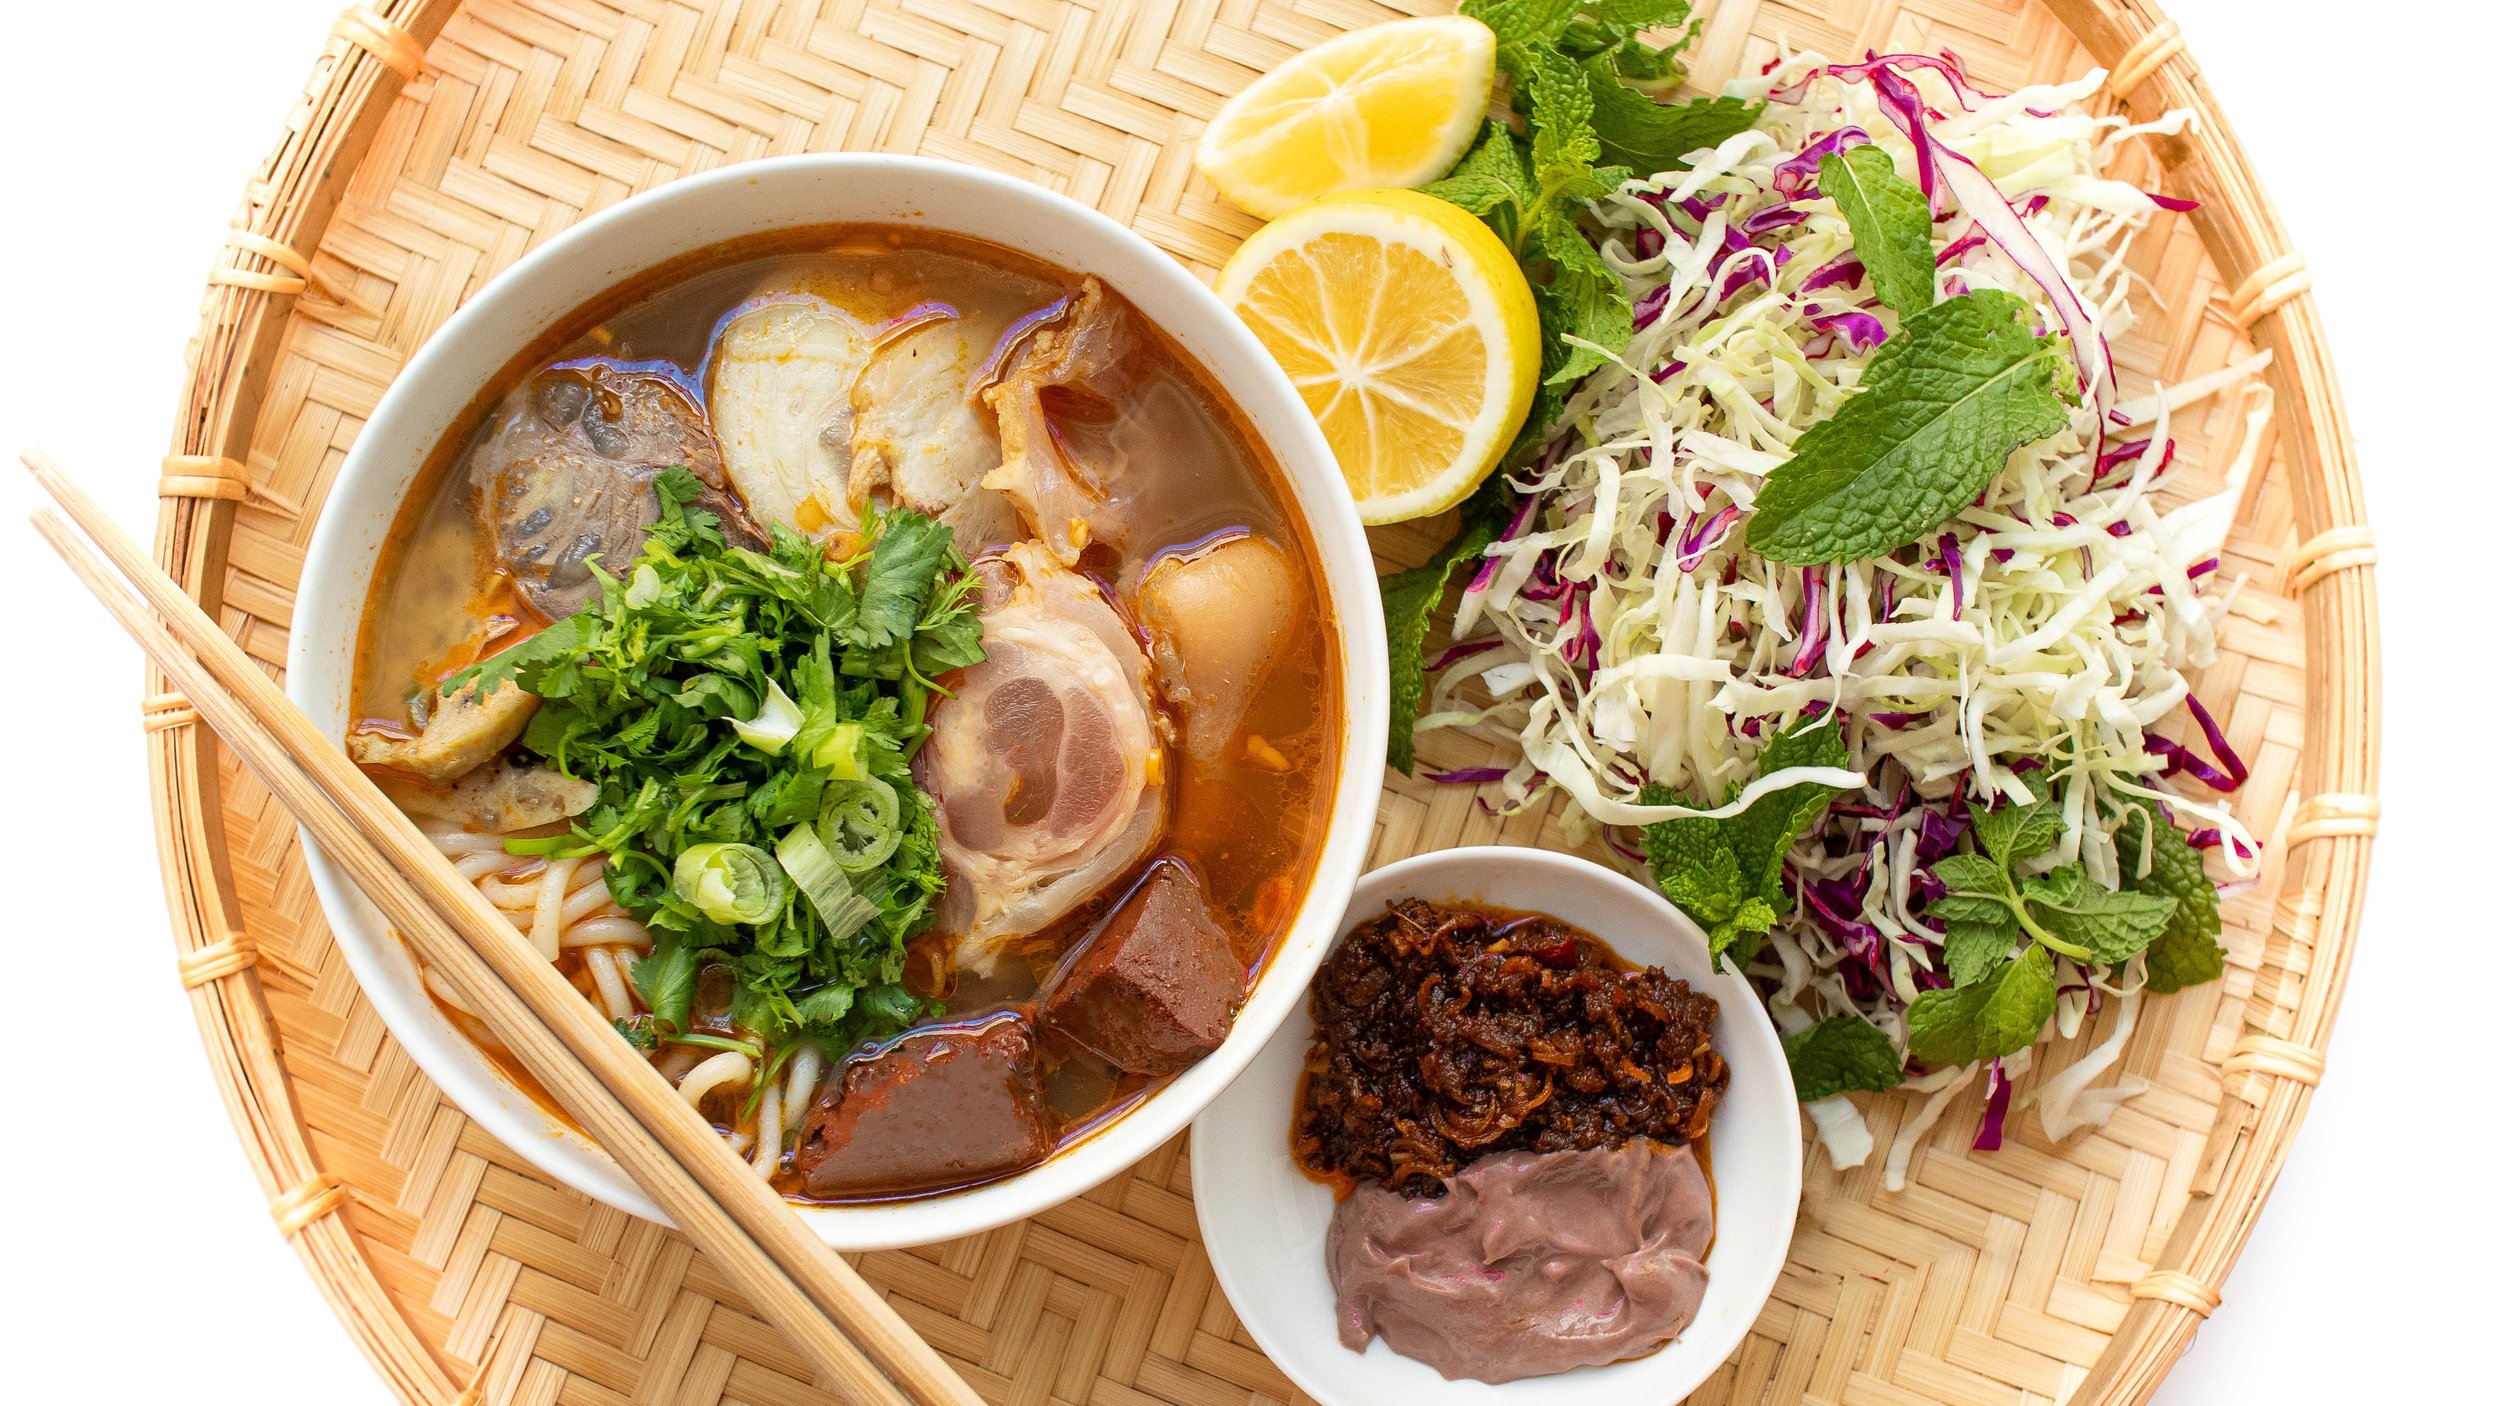 Taste a spicy and aromatic Vietnamese noodle soup called Bun Bo Hue.